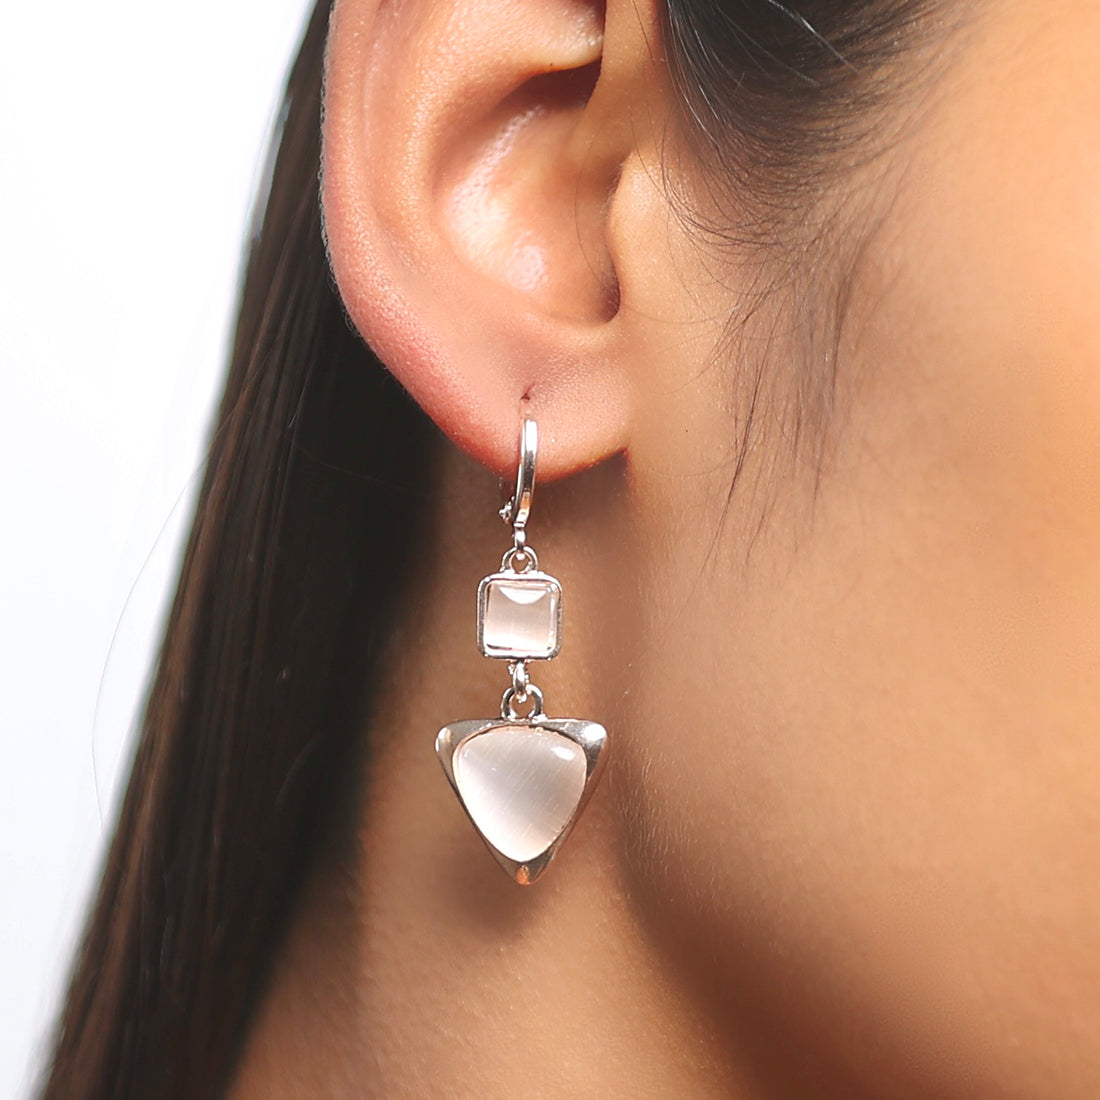 Square & Triangle White Moonstone Rose Gold-Toned Hoop Drop Earrings